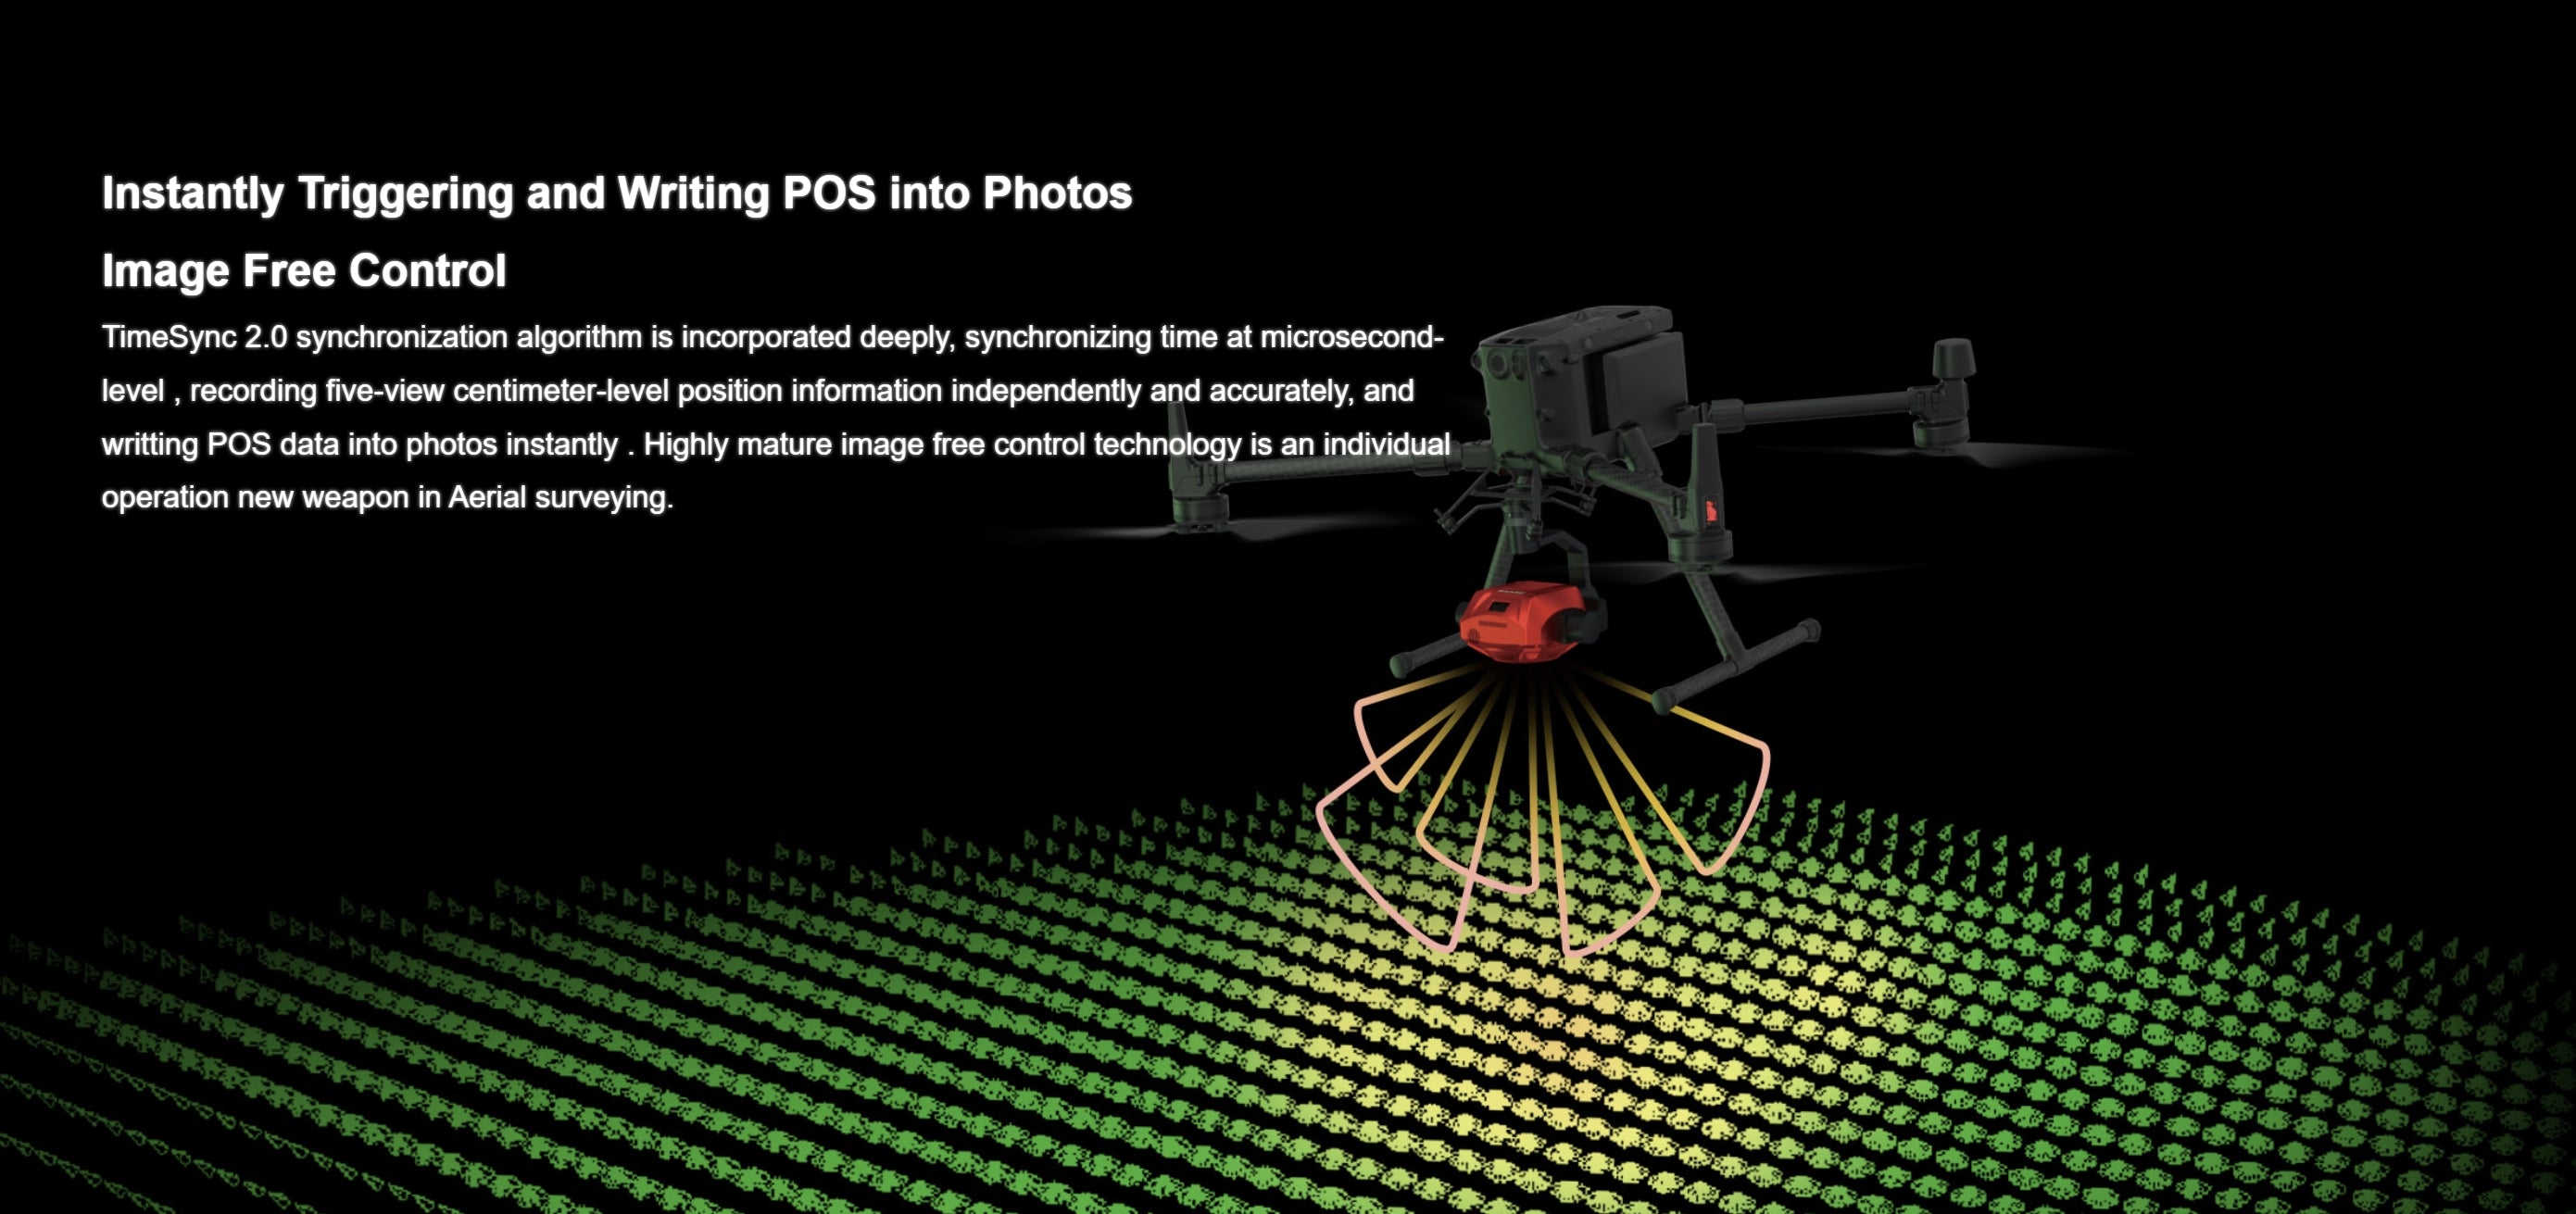 SHARE PSDK 102S V3, Advanced image-free control technology for accurate positioning data in aerial surveys and mapping.